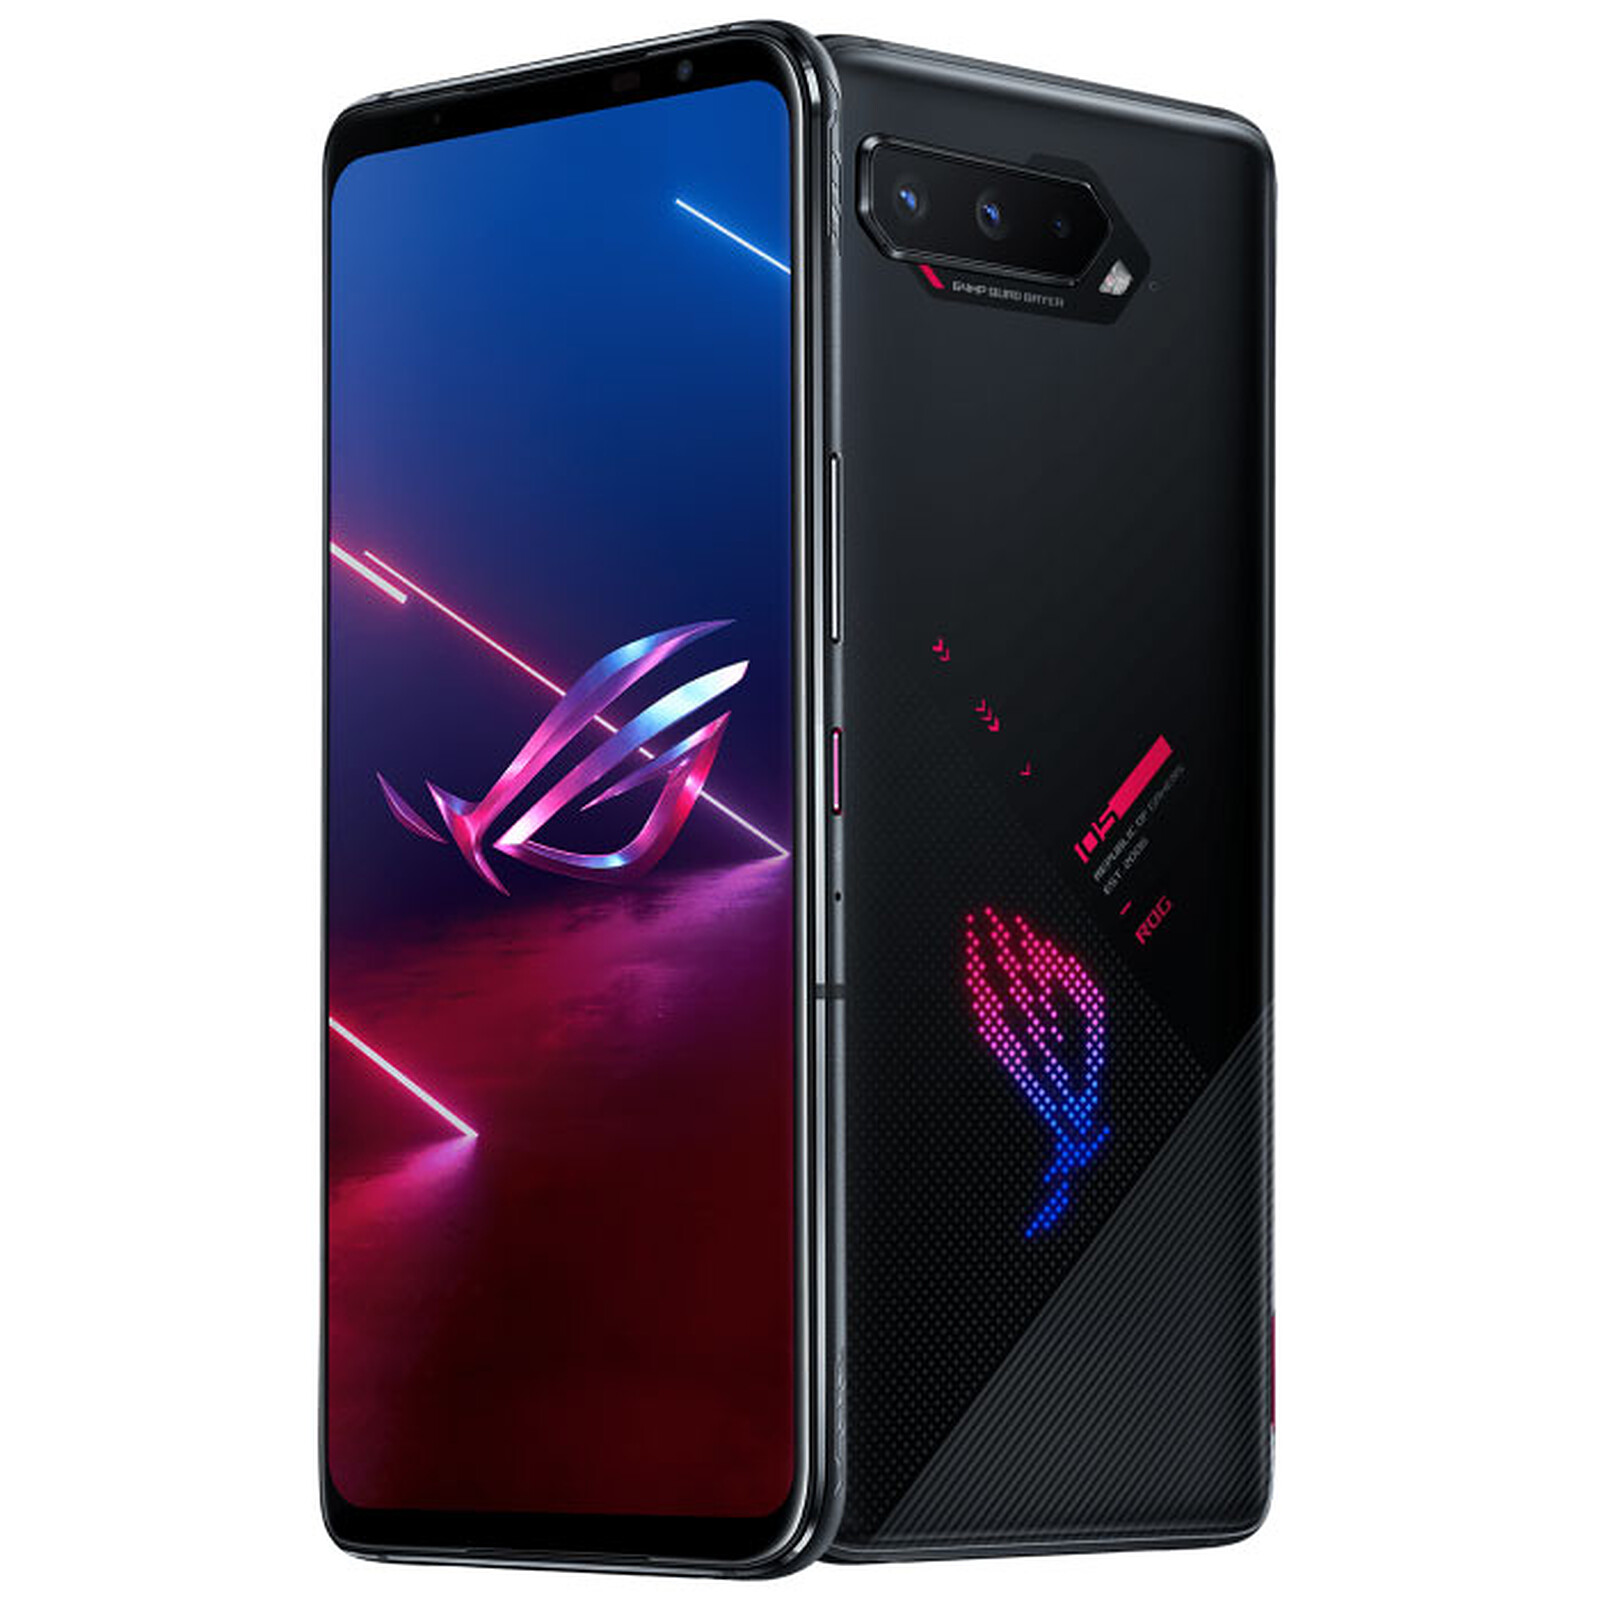 ASUS ROG Phone 5s Black (12GB / 512GB) - Mobile phone & smartphone ASUS on LDLC | Holy Moley